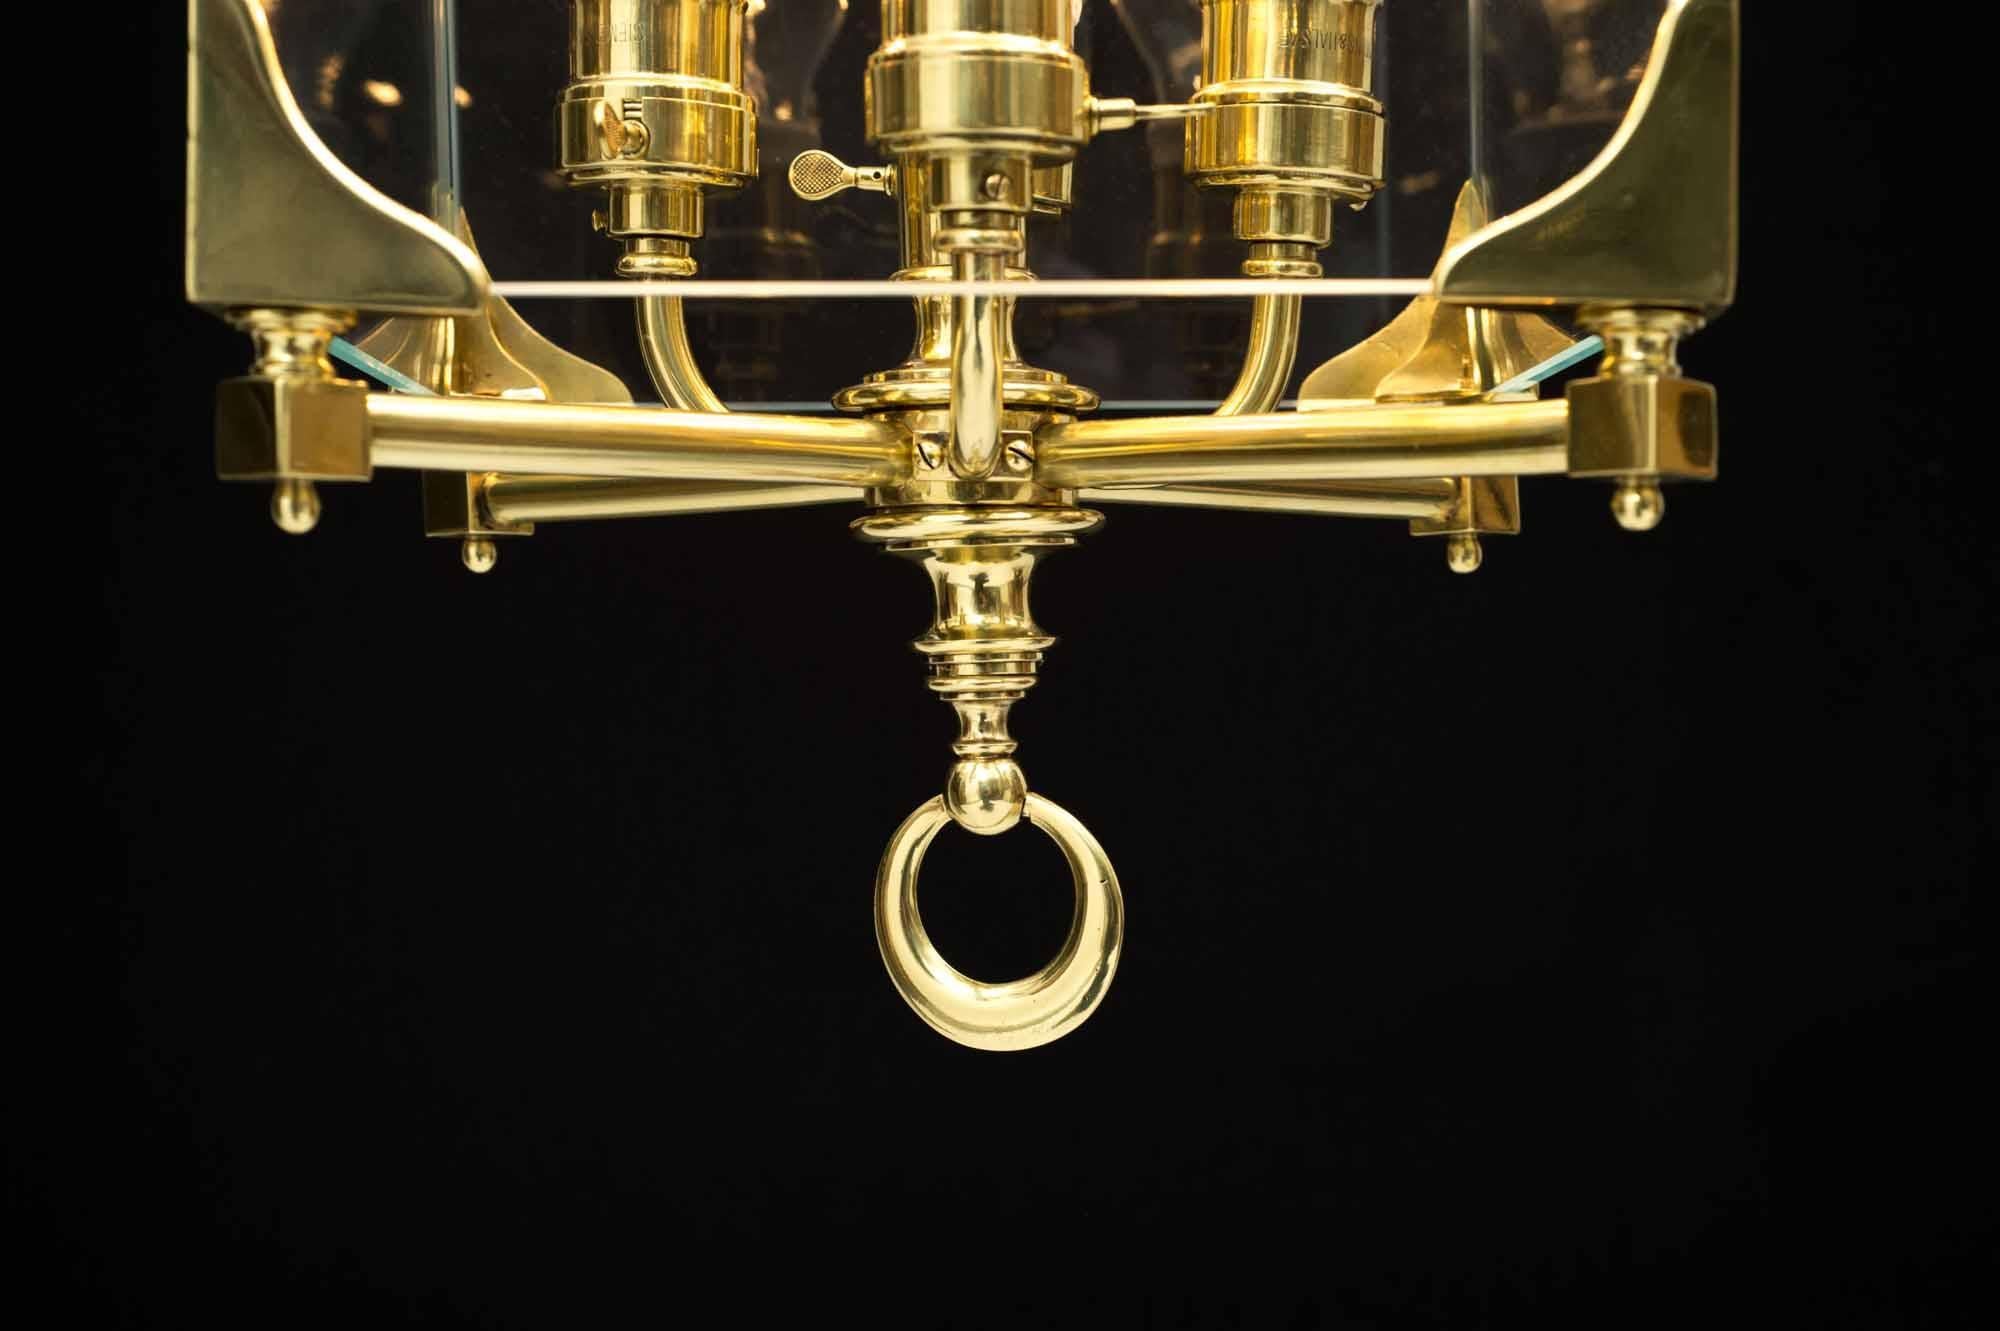 Contemporary Adolf Loos Secession Jugendstil Glass and Brass Lantern Chandelier Re-Edition For Sale